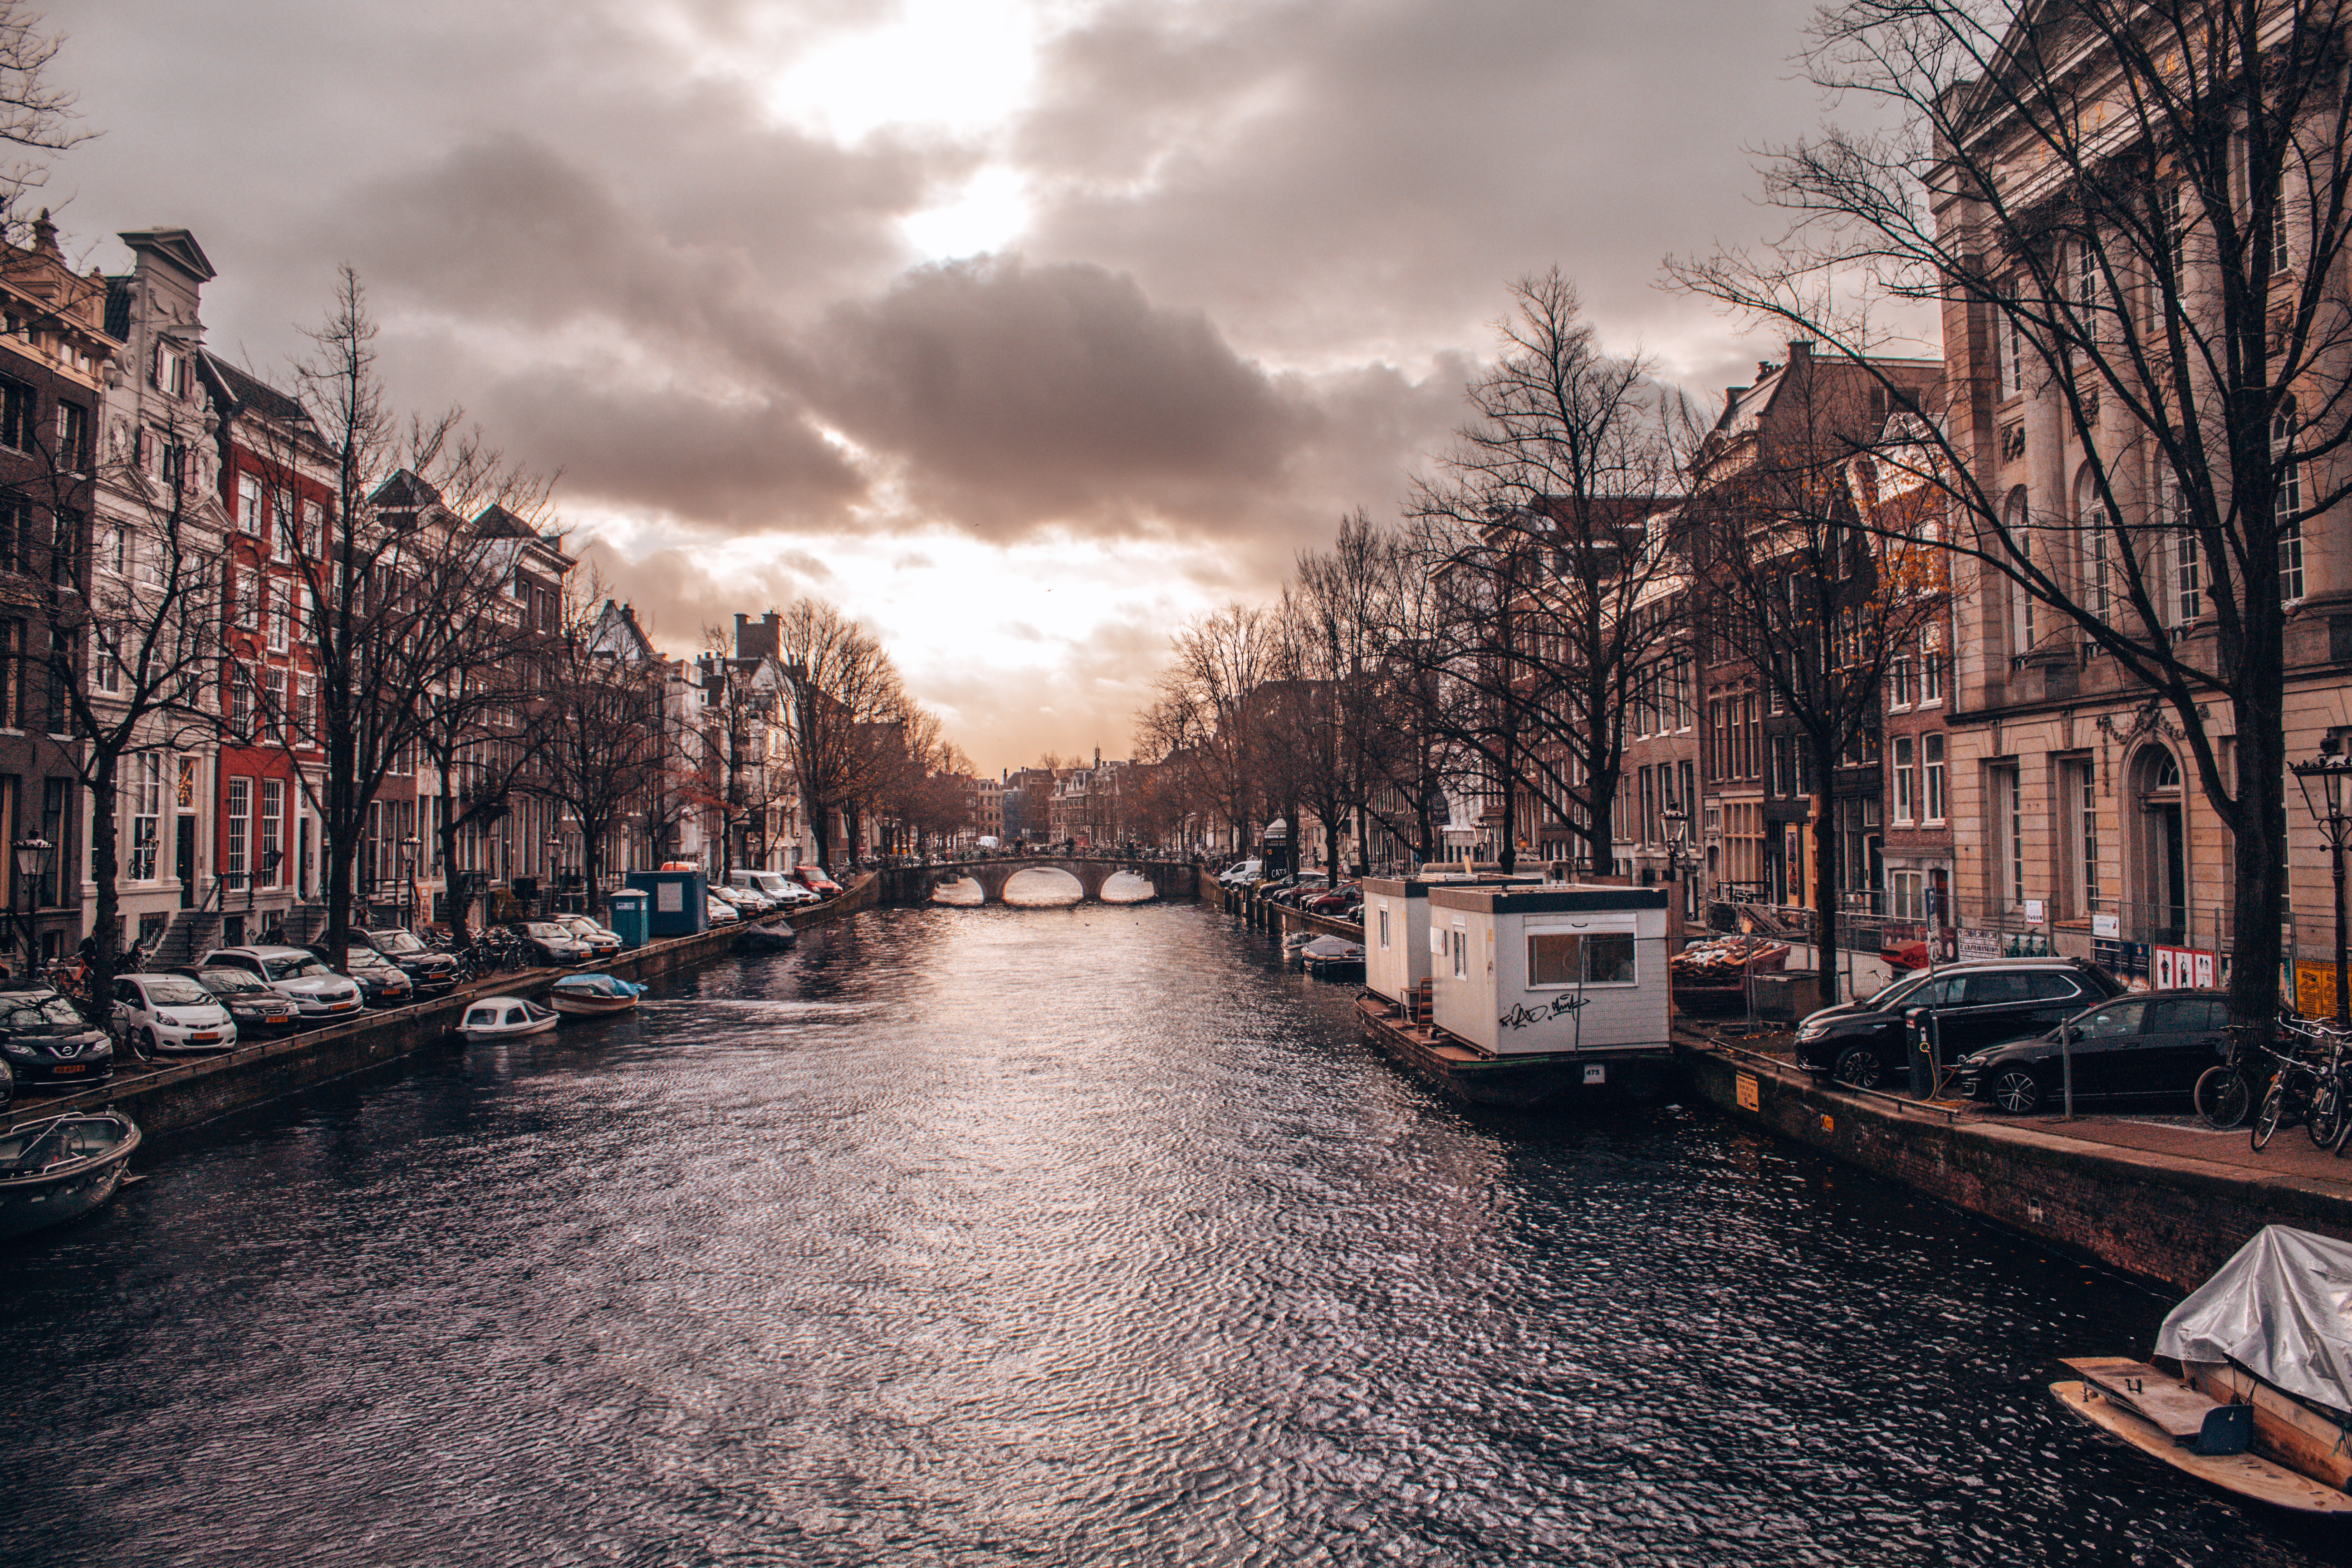 A lovely sunset over the canals of Amsterdam, Netherlands